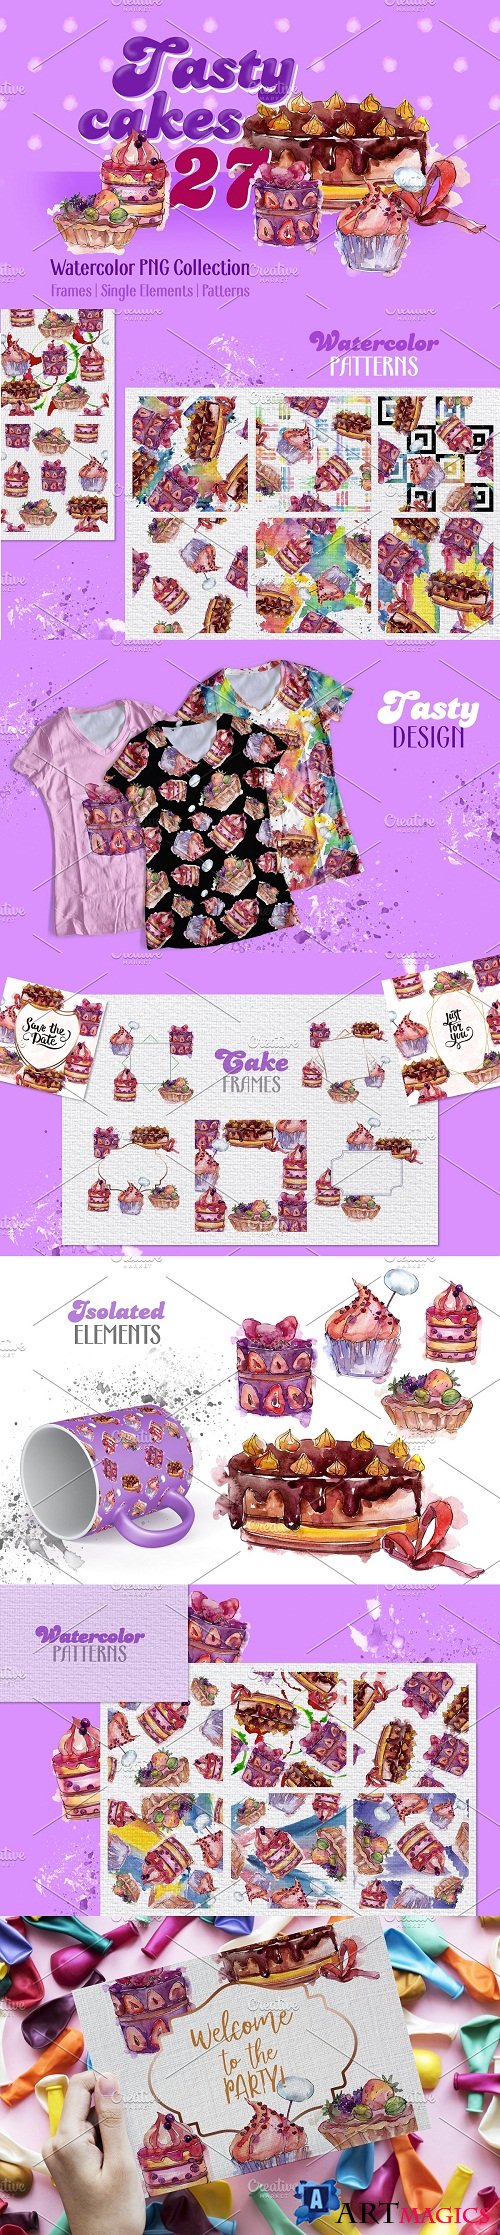 Tasty cakes violet Watercolor png - 3739021